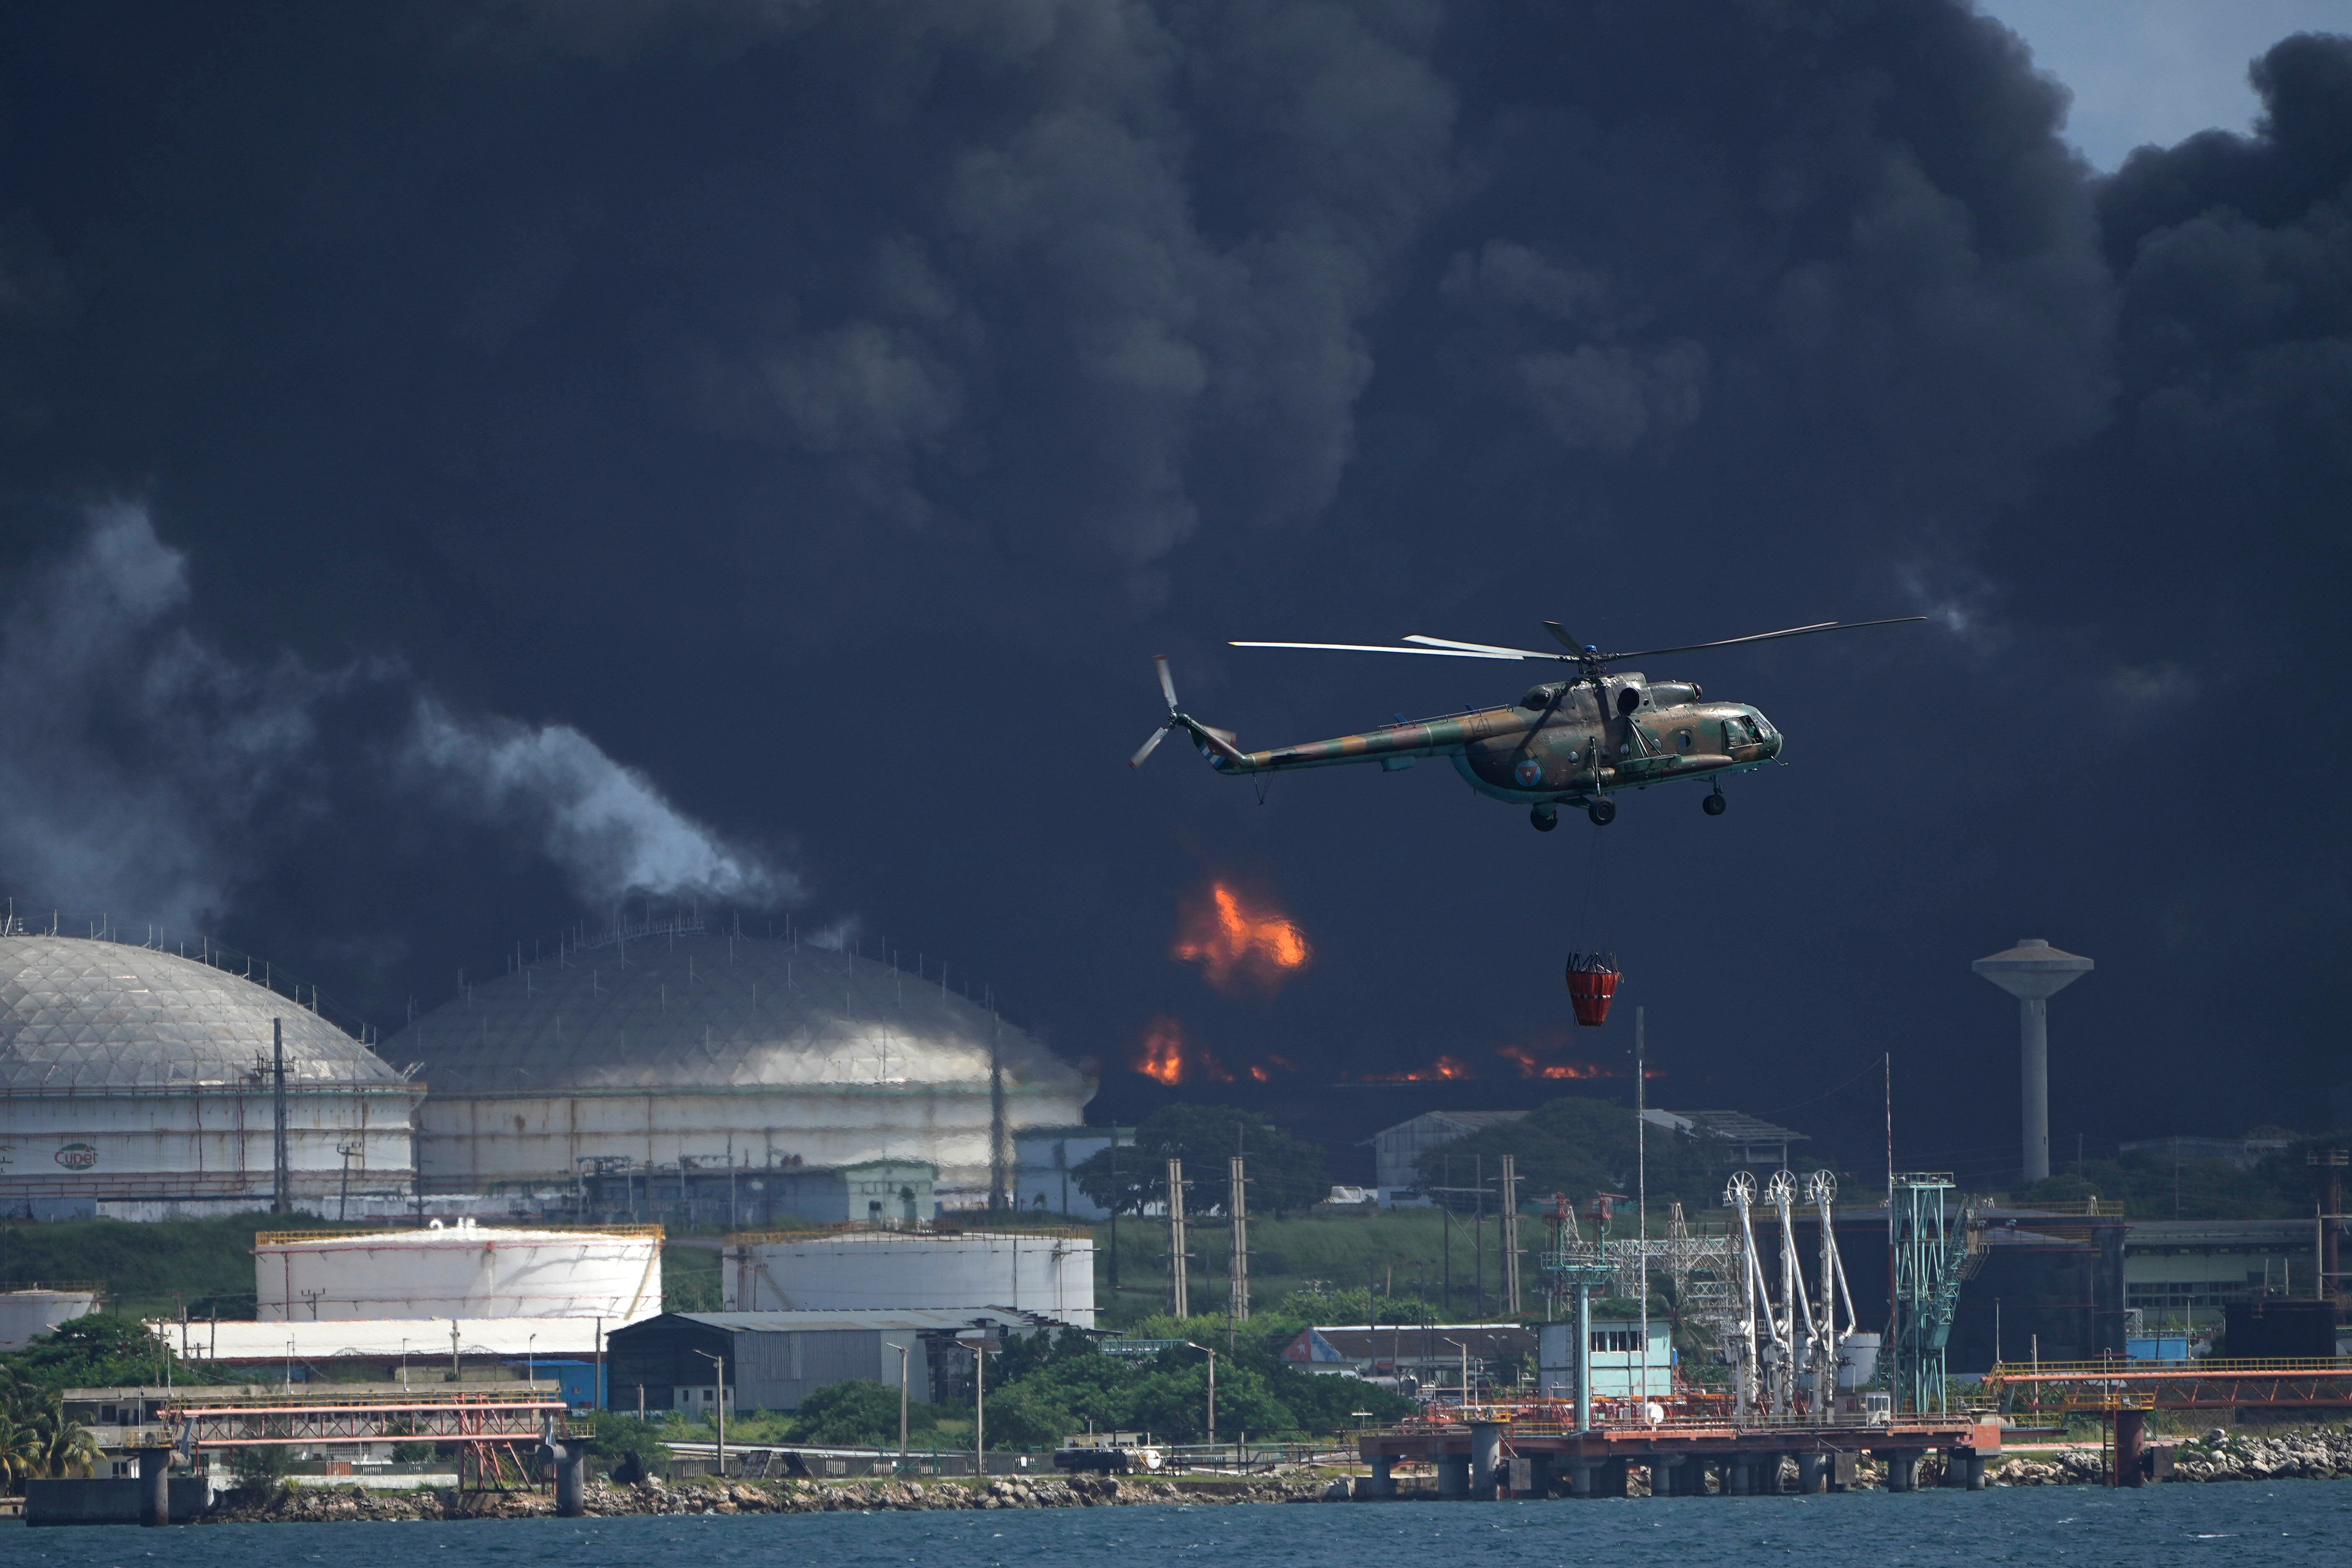 Fire at Cuban oil facility leaves 1 dead, 121 injured: officials